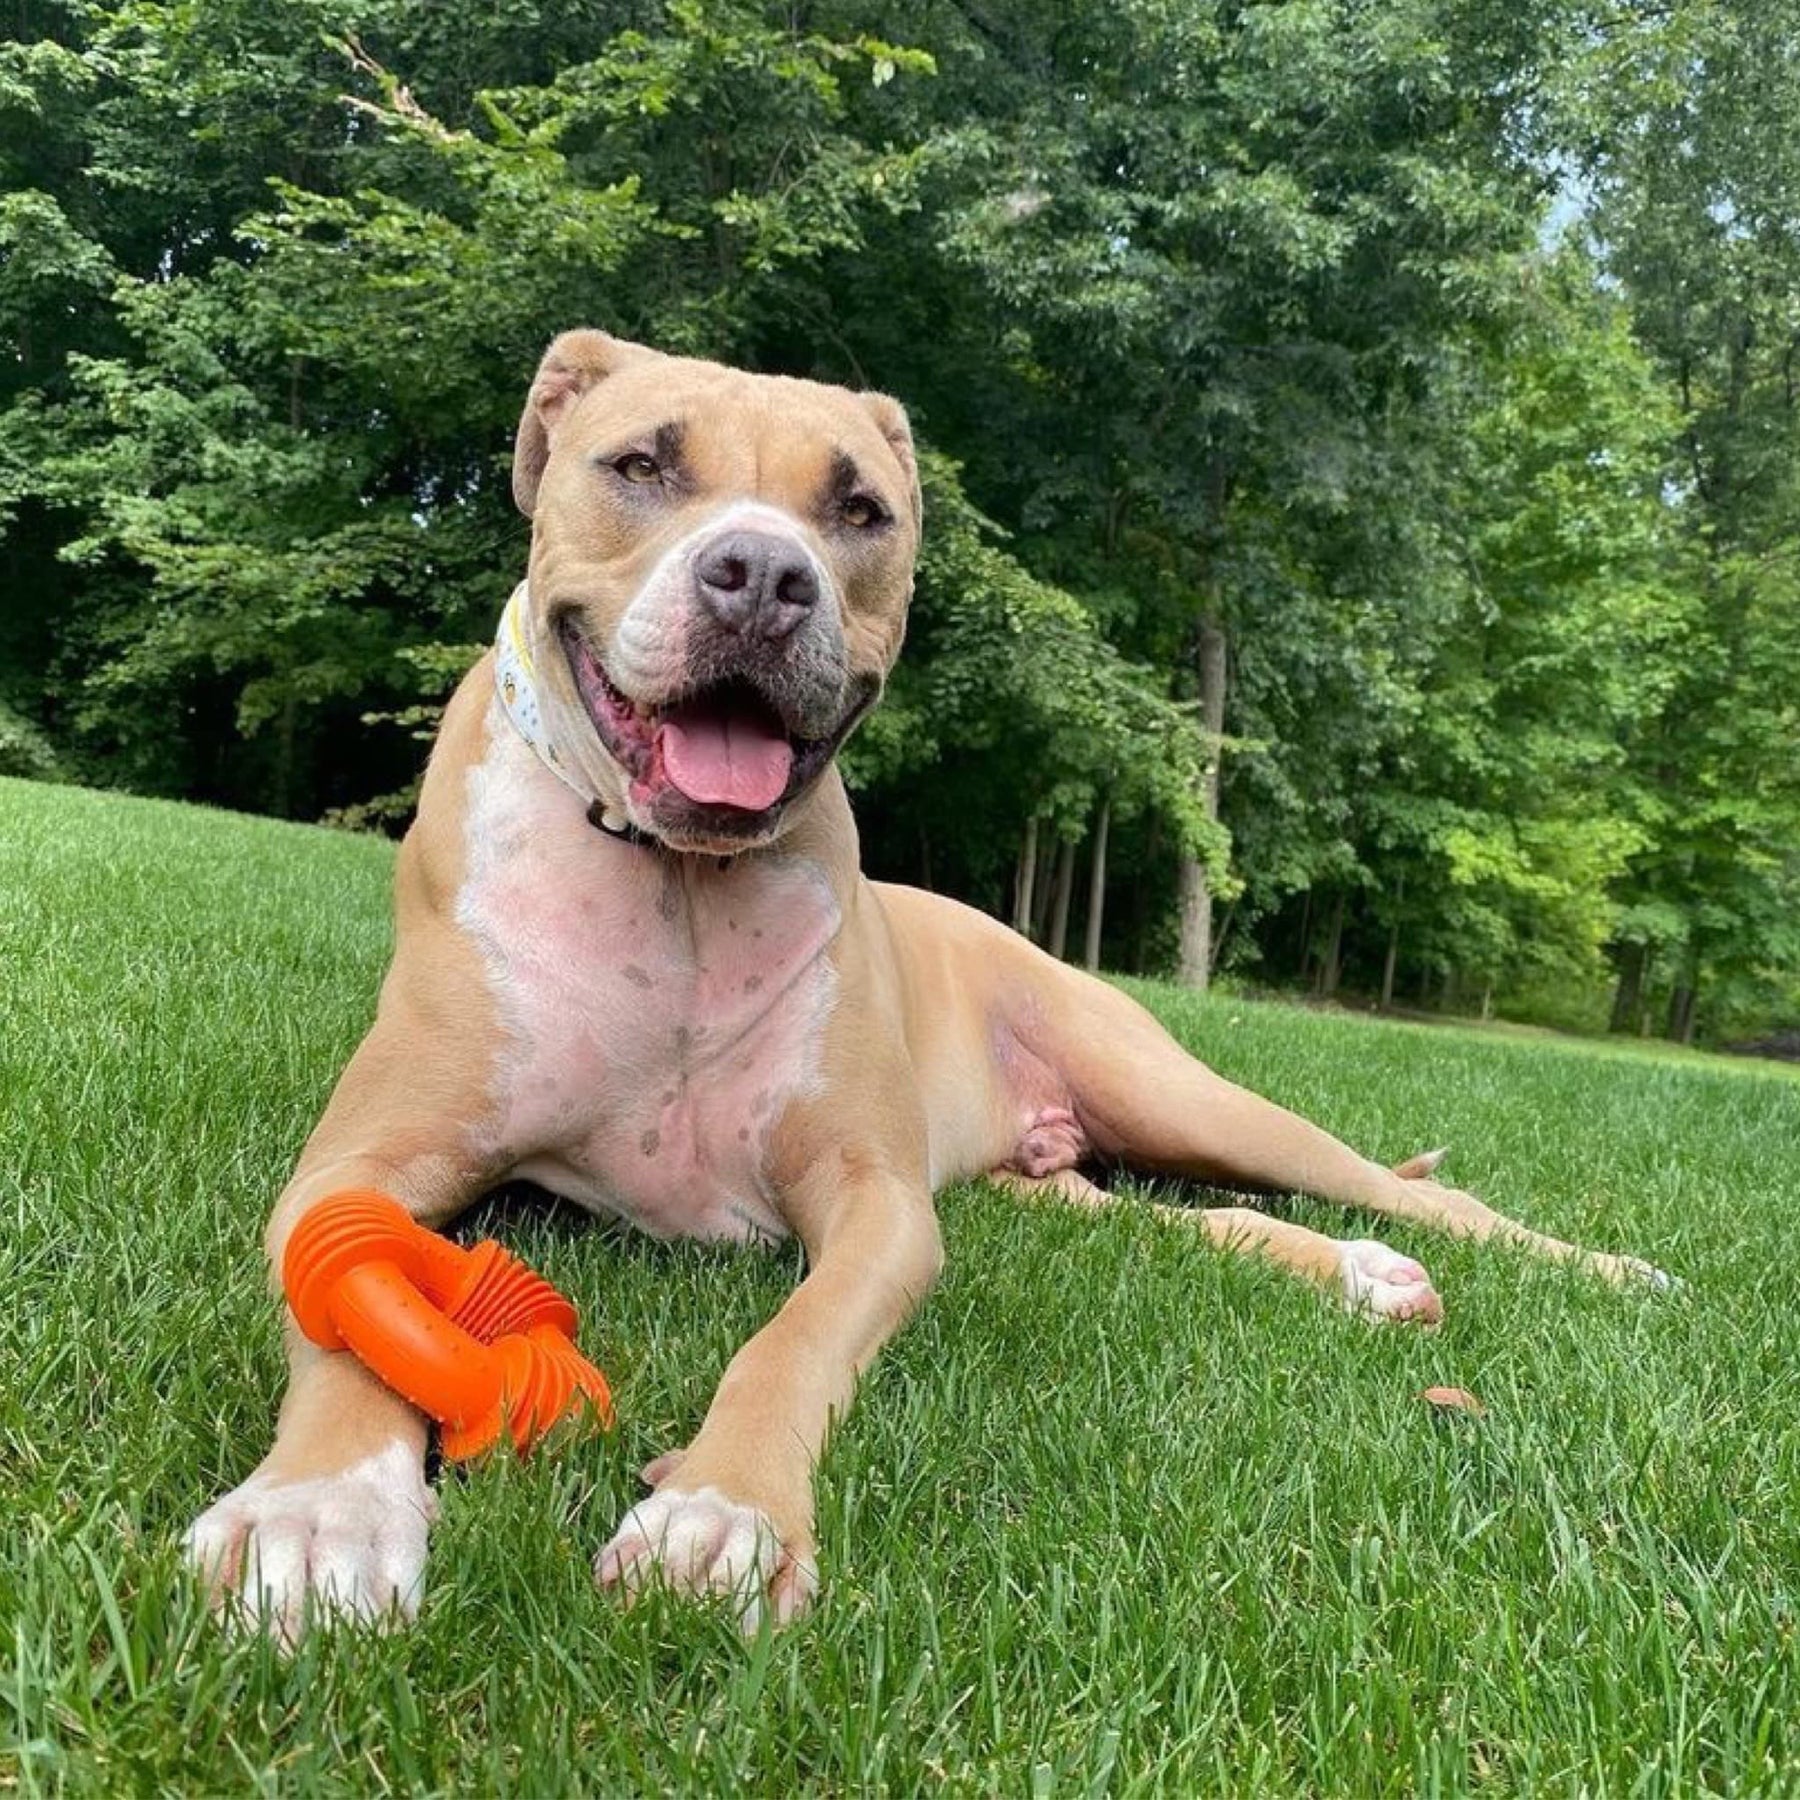 Big Dog Laying In Grass With Orange DuraPaw Tough Rubber Chew Toy 